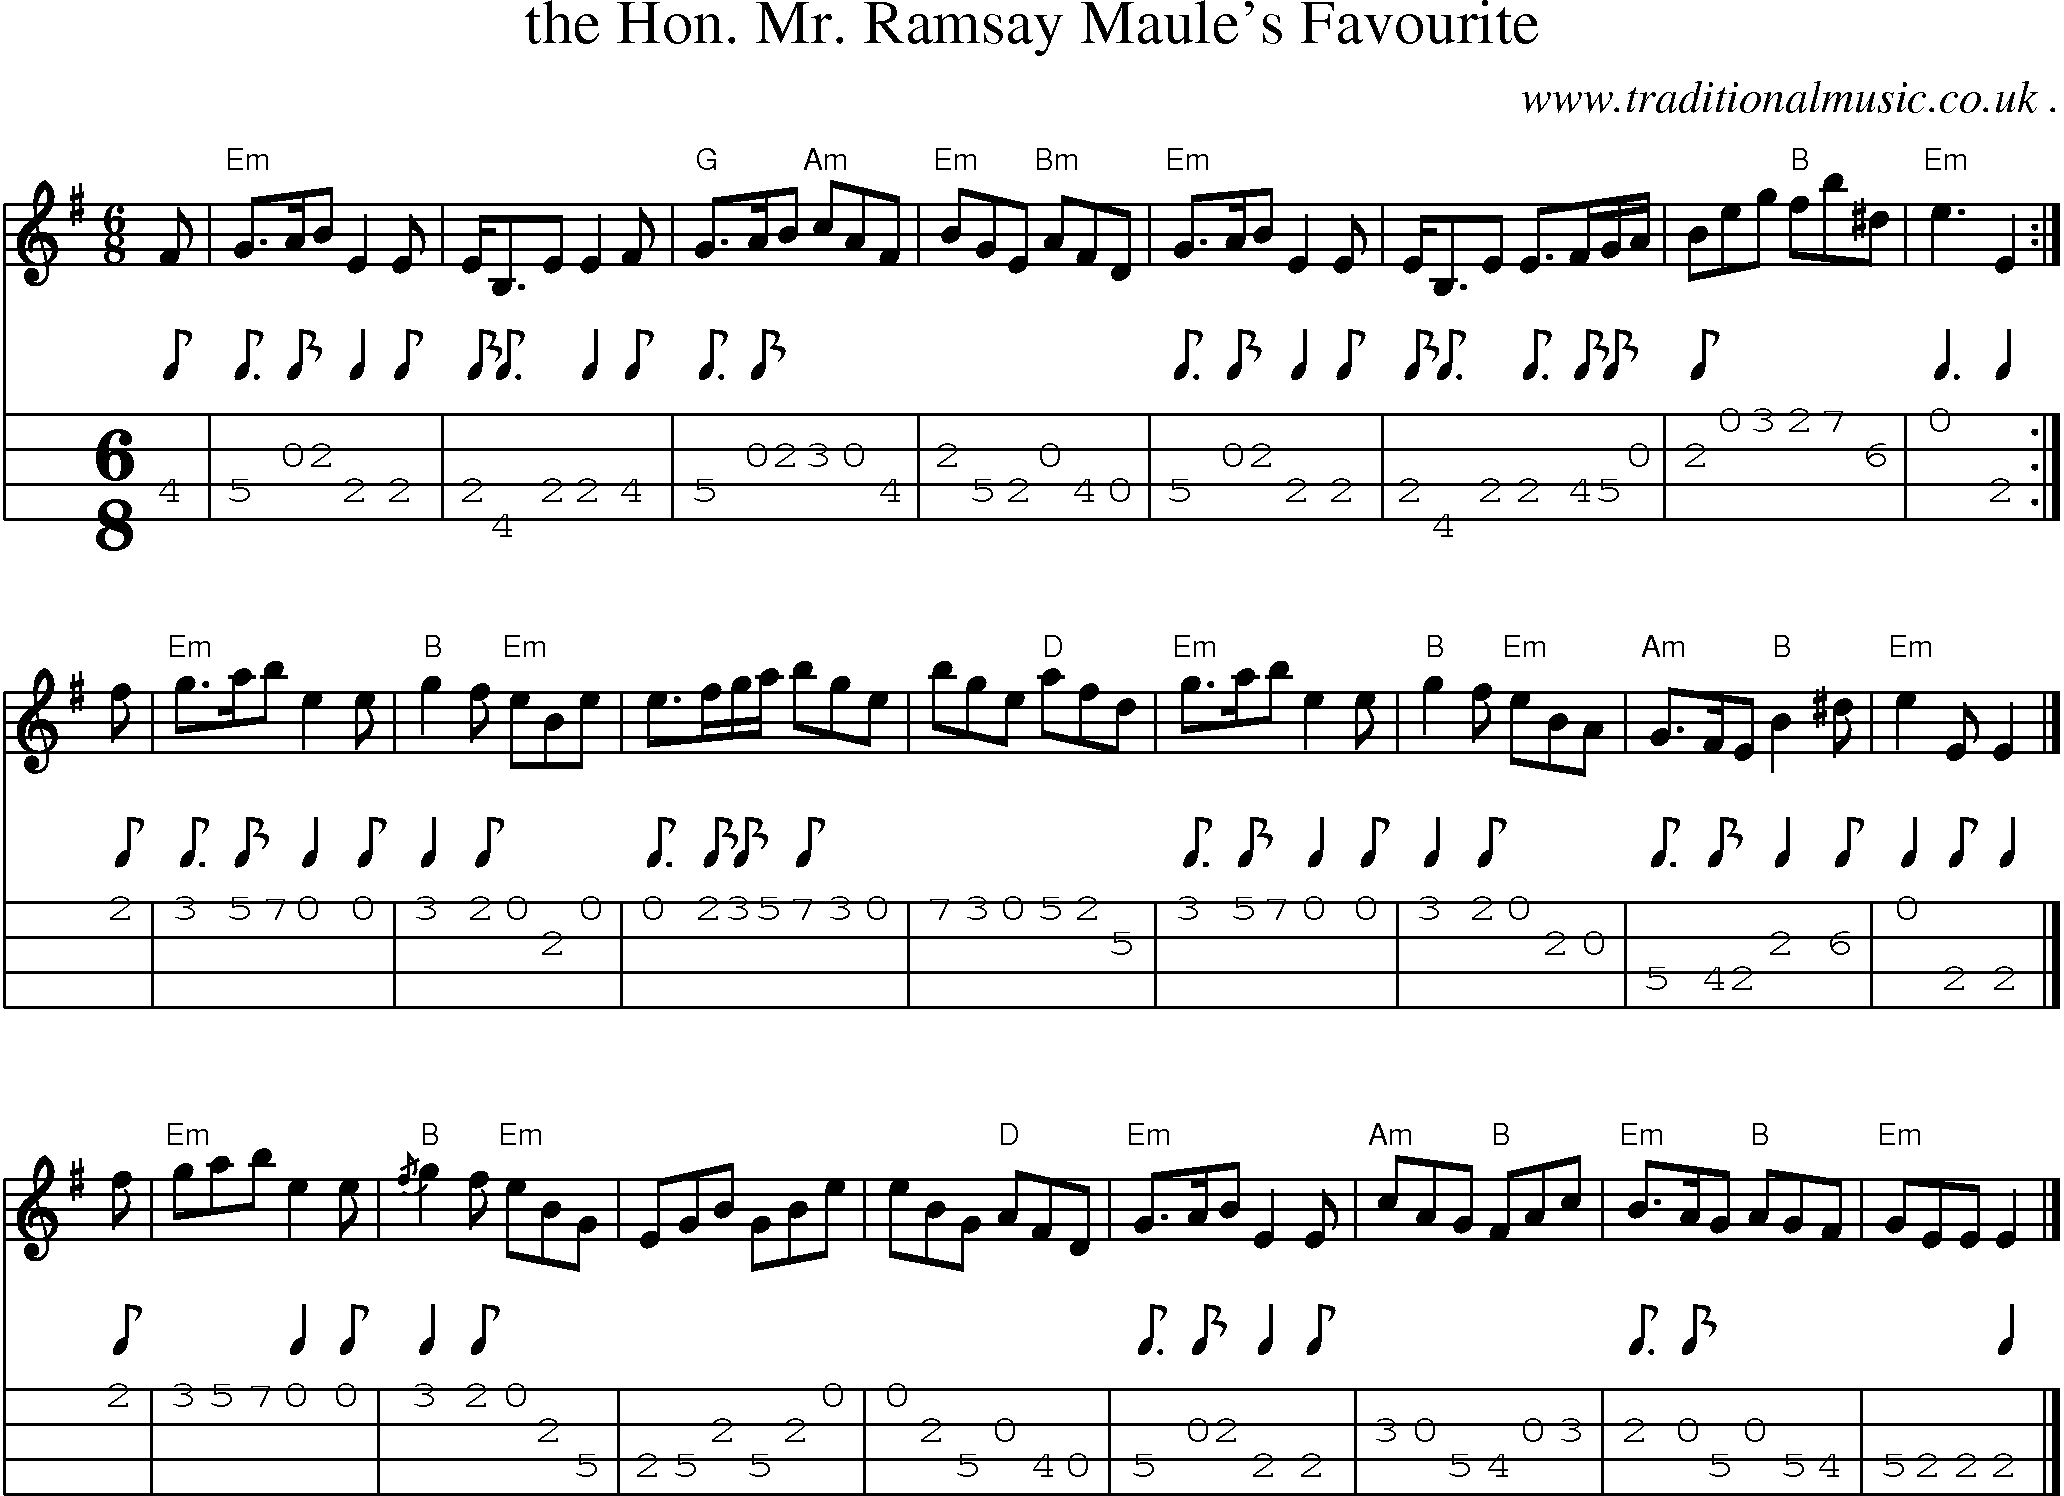 Sheet-music  score, Chords and Mandolin Tabs for The Hon Mr Ramsay Maules Favourite